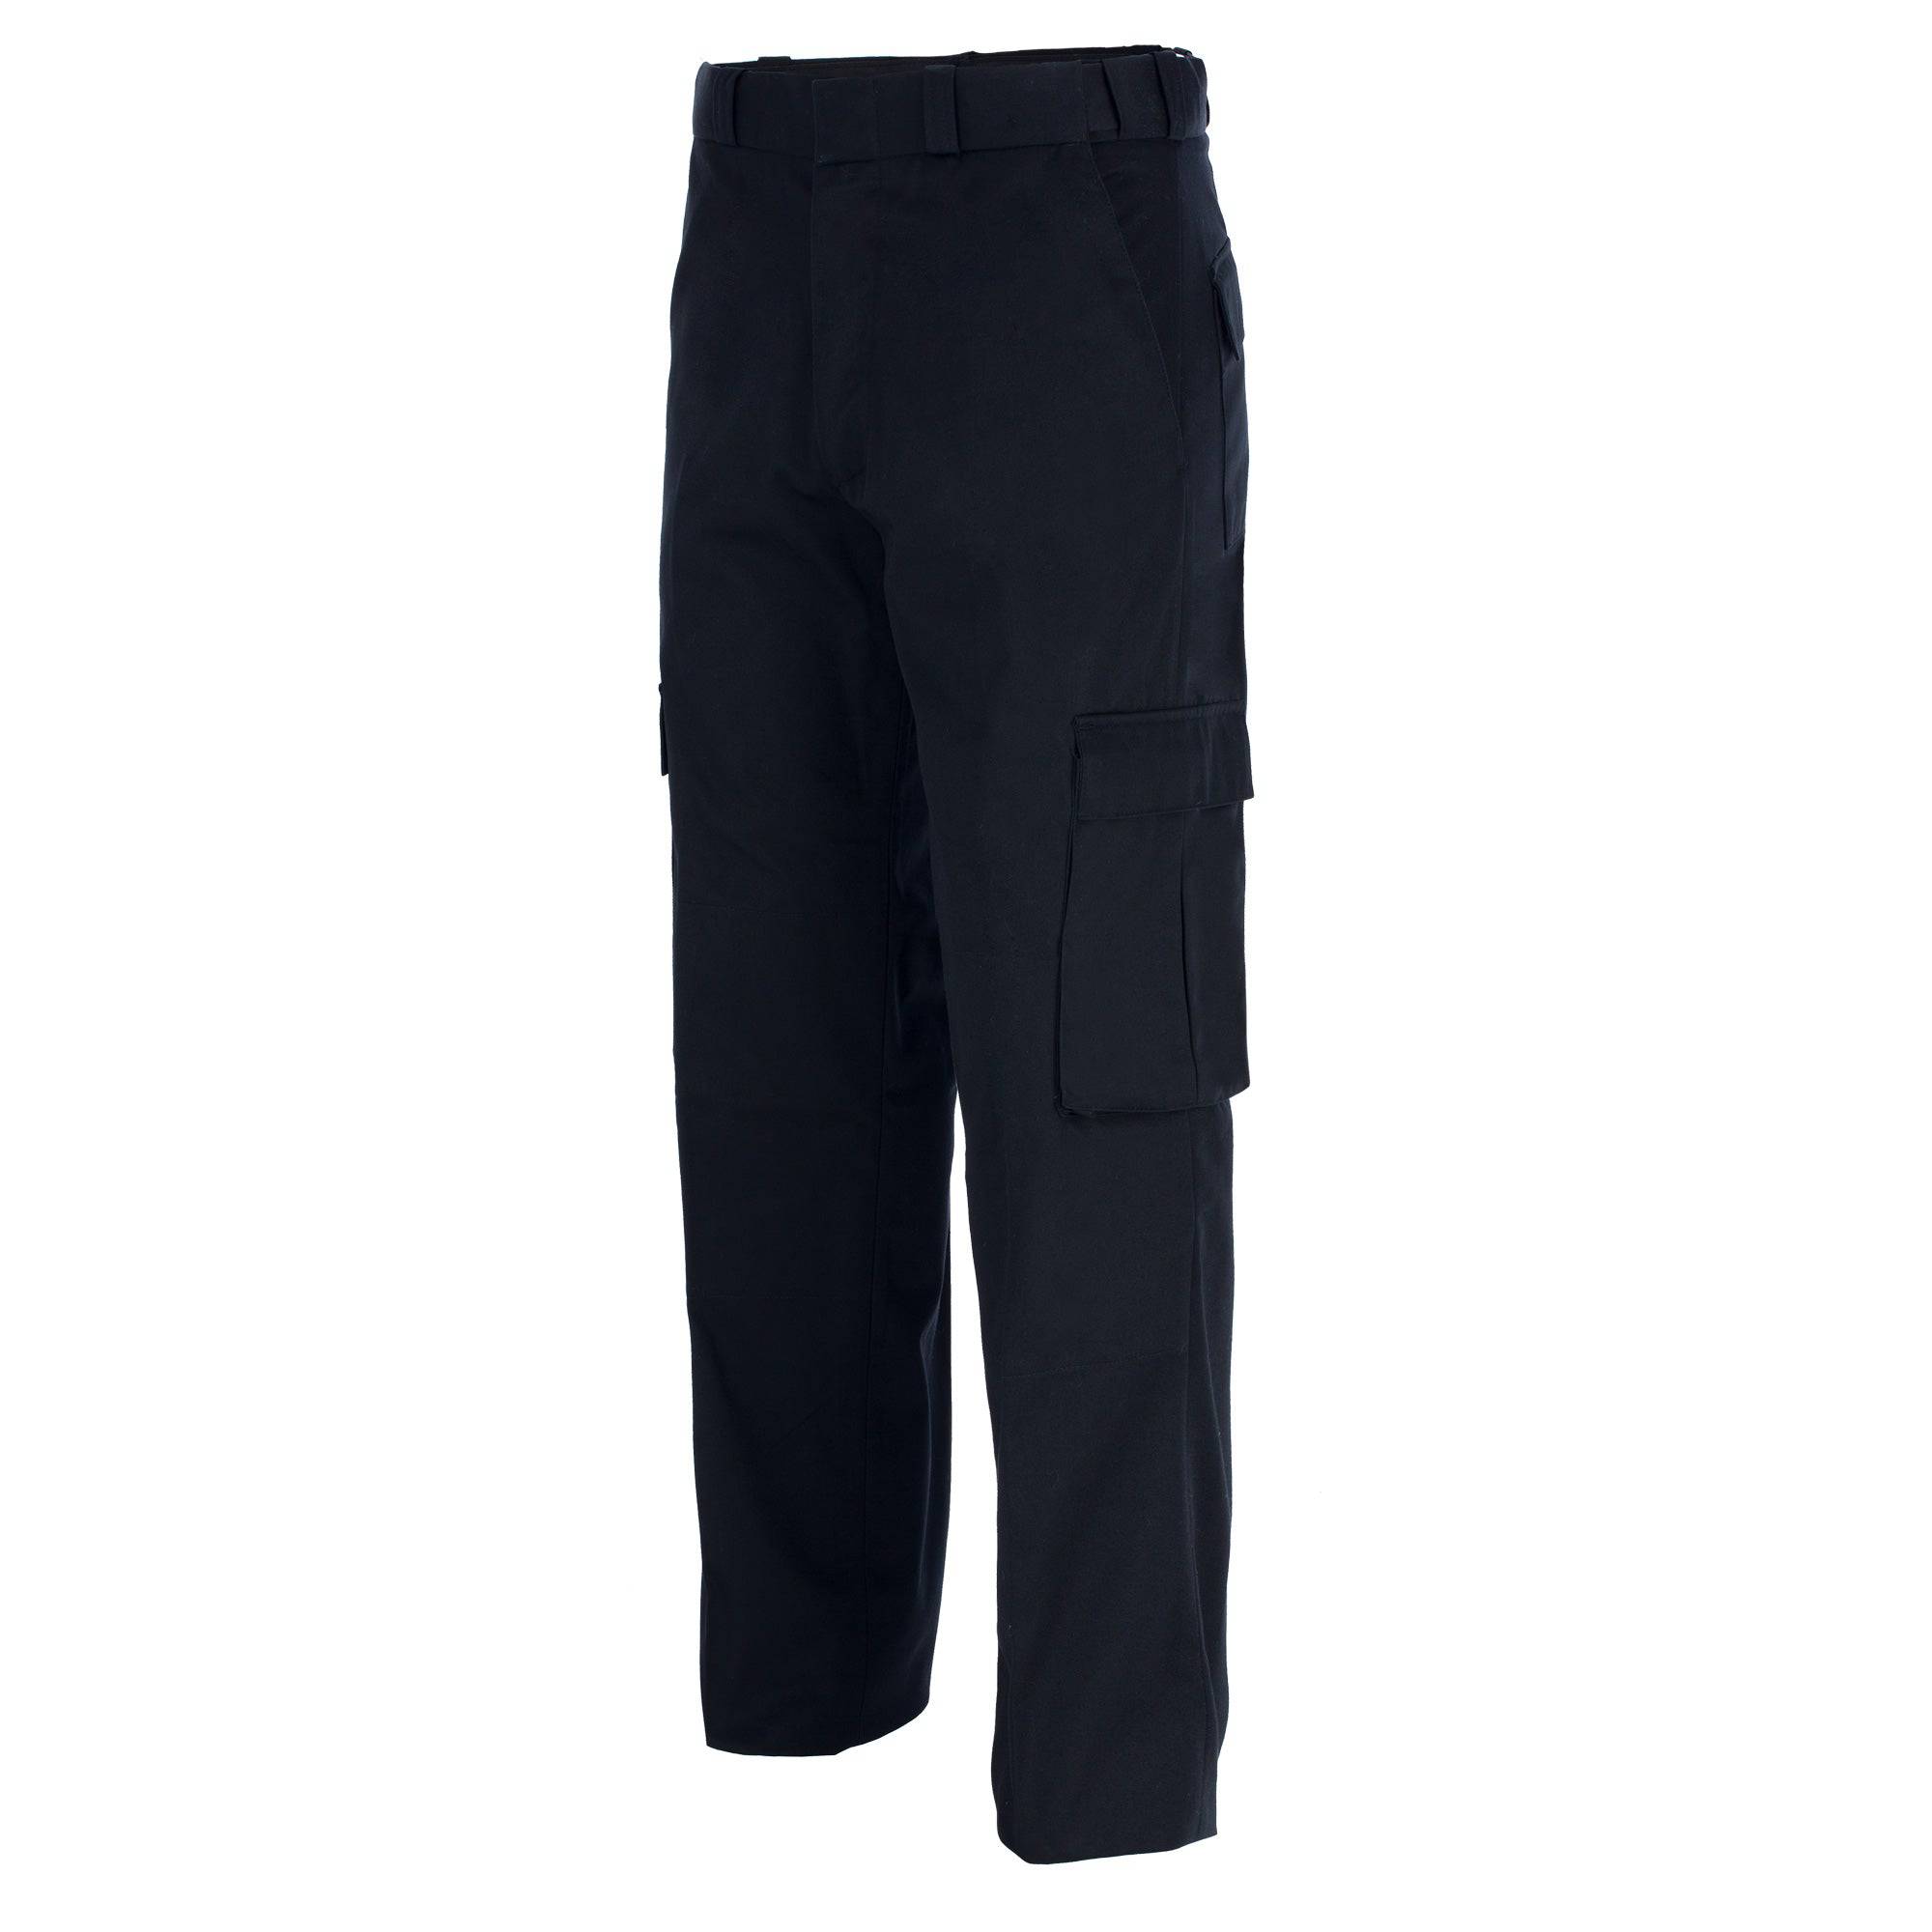 Tact Squad EMS/EMT Utility Trousers (7011) Women